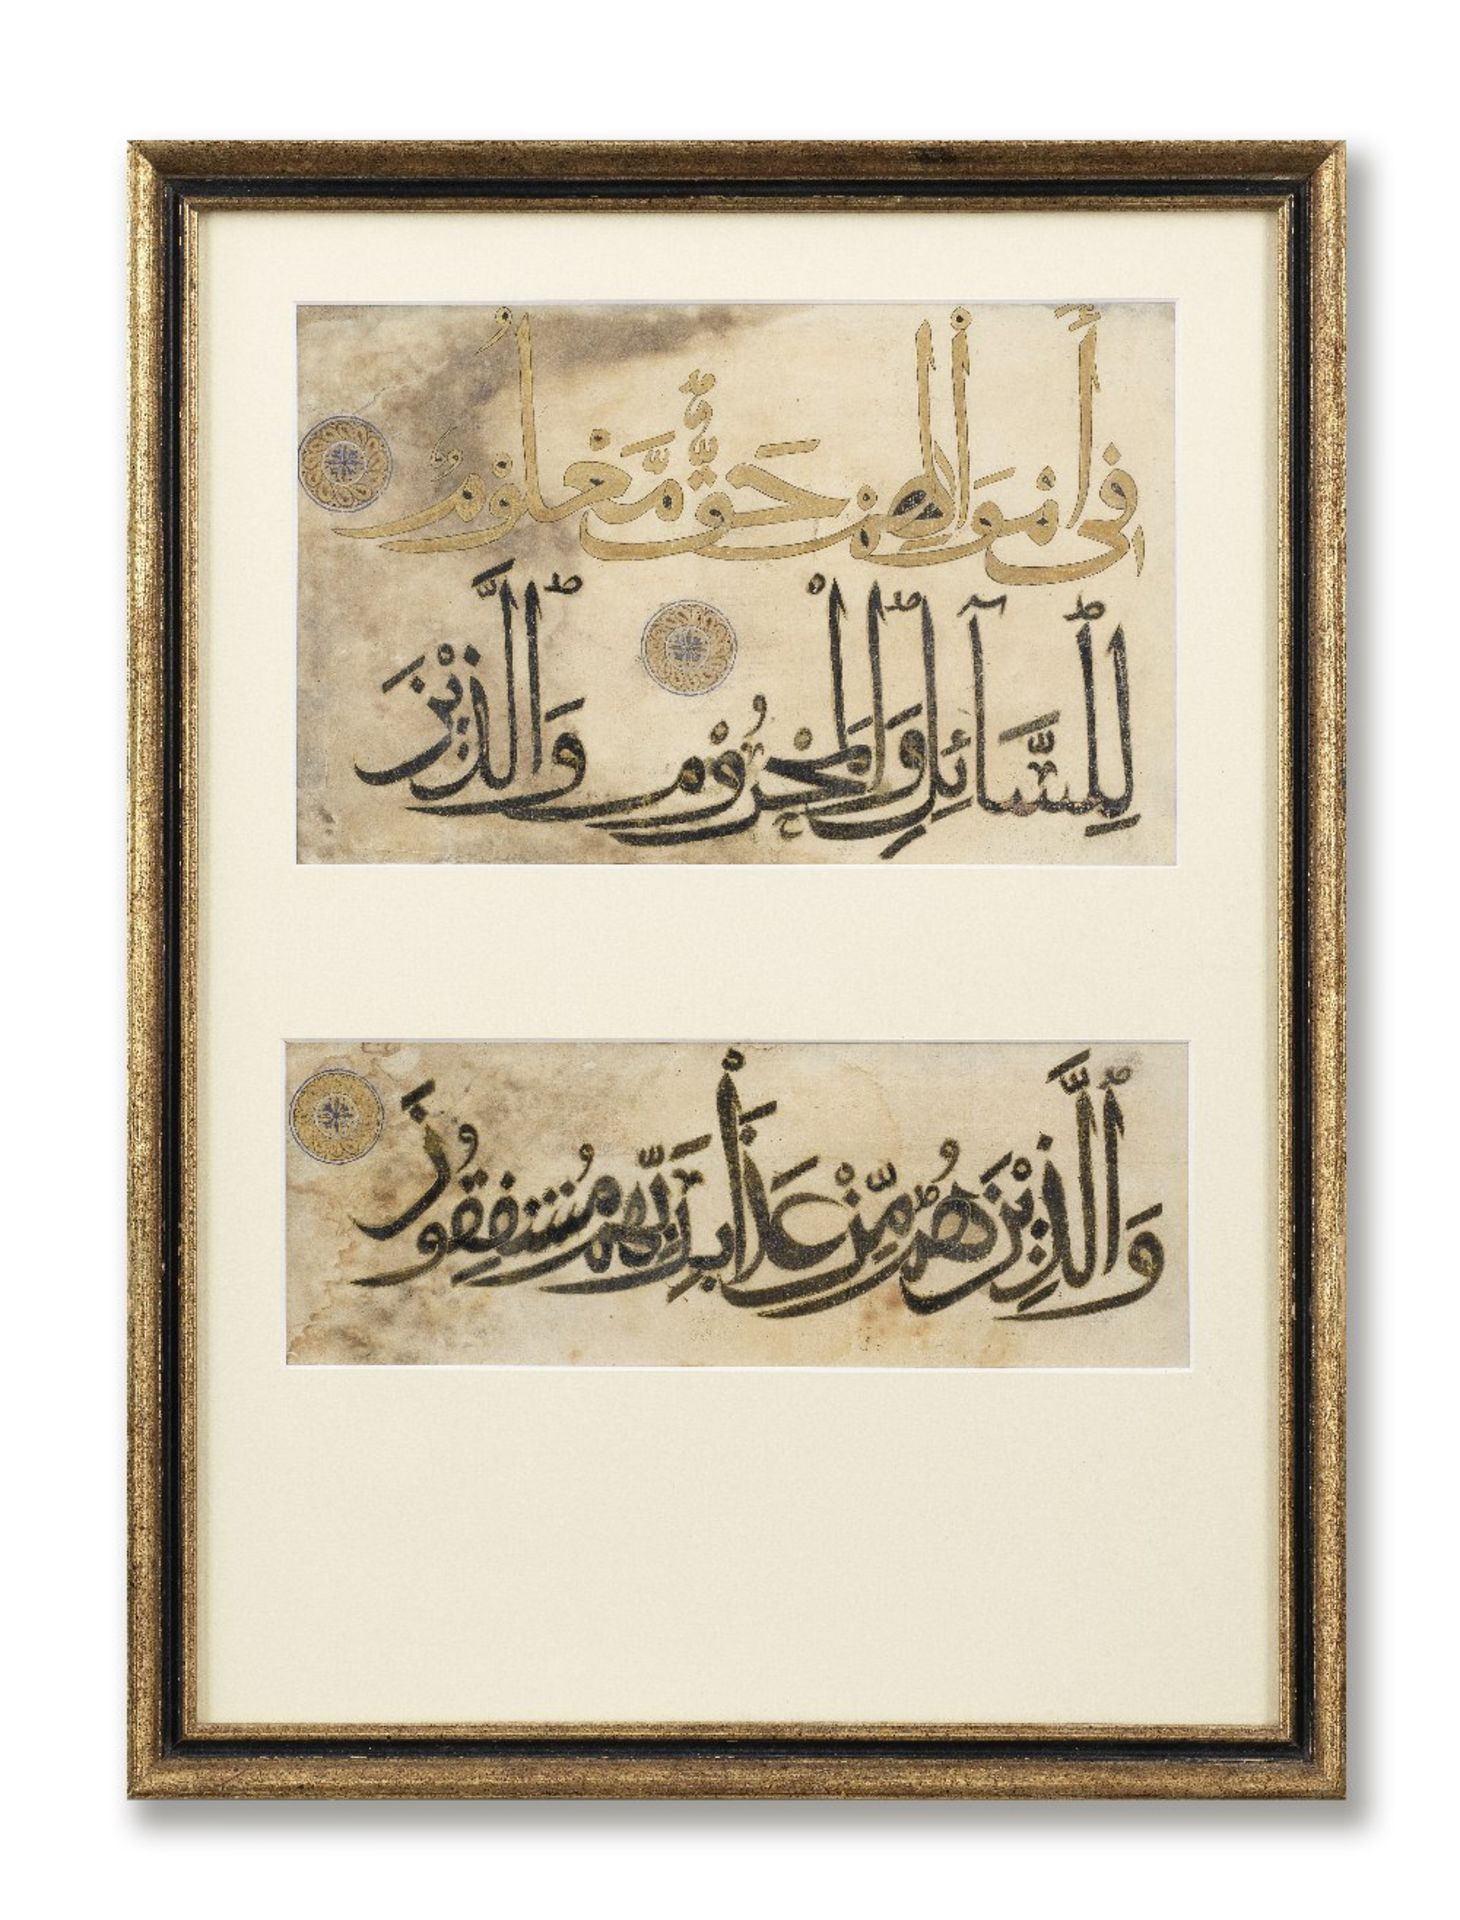 Three lines in muhaqqaq script from a large Ilkhanid manuscript of the Qur'an Iraq, early 14th C...